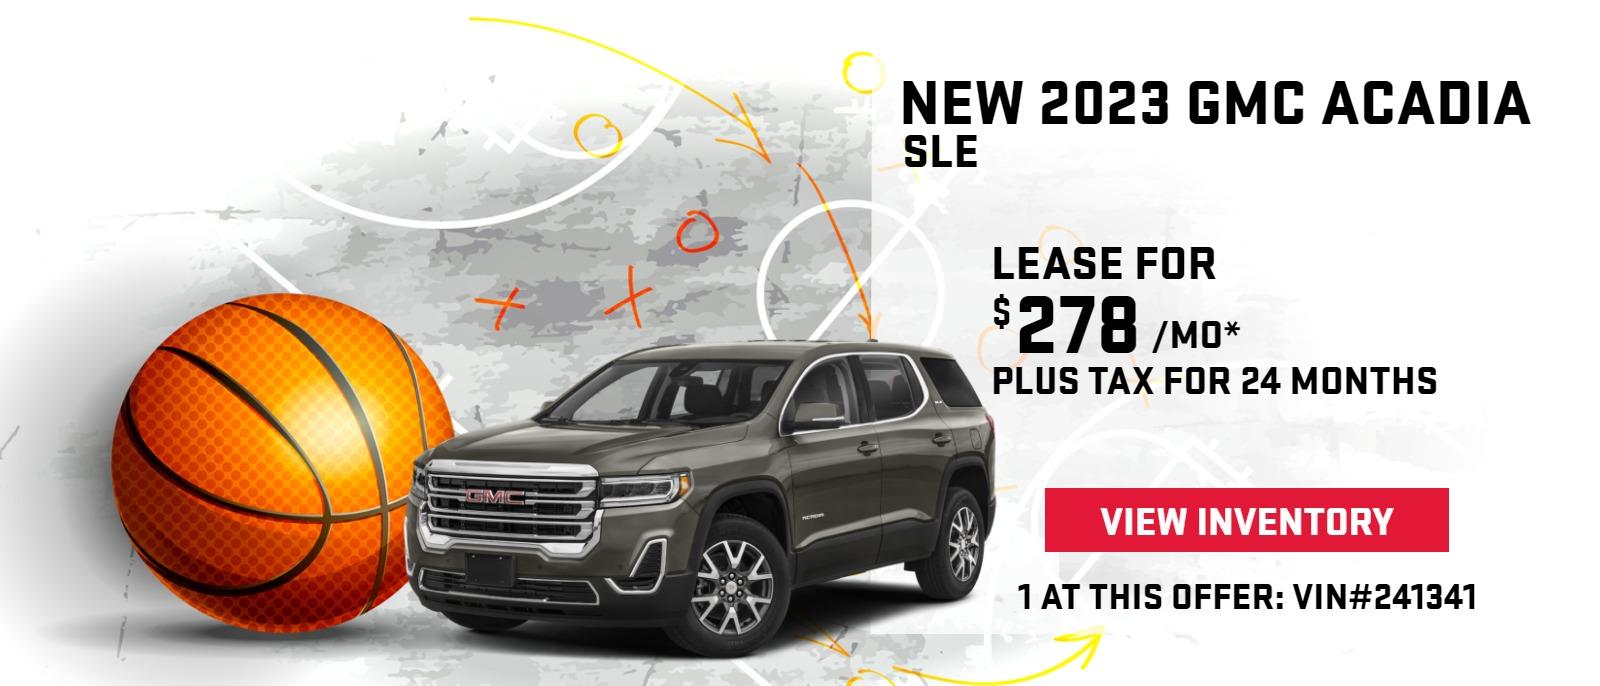 New 2023 GMC Acadia SLE
$278/mo*. Lease + Tax for 24 Months
1 at this offer. VIN # 241341.